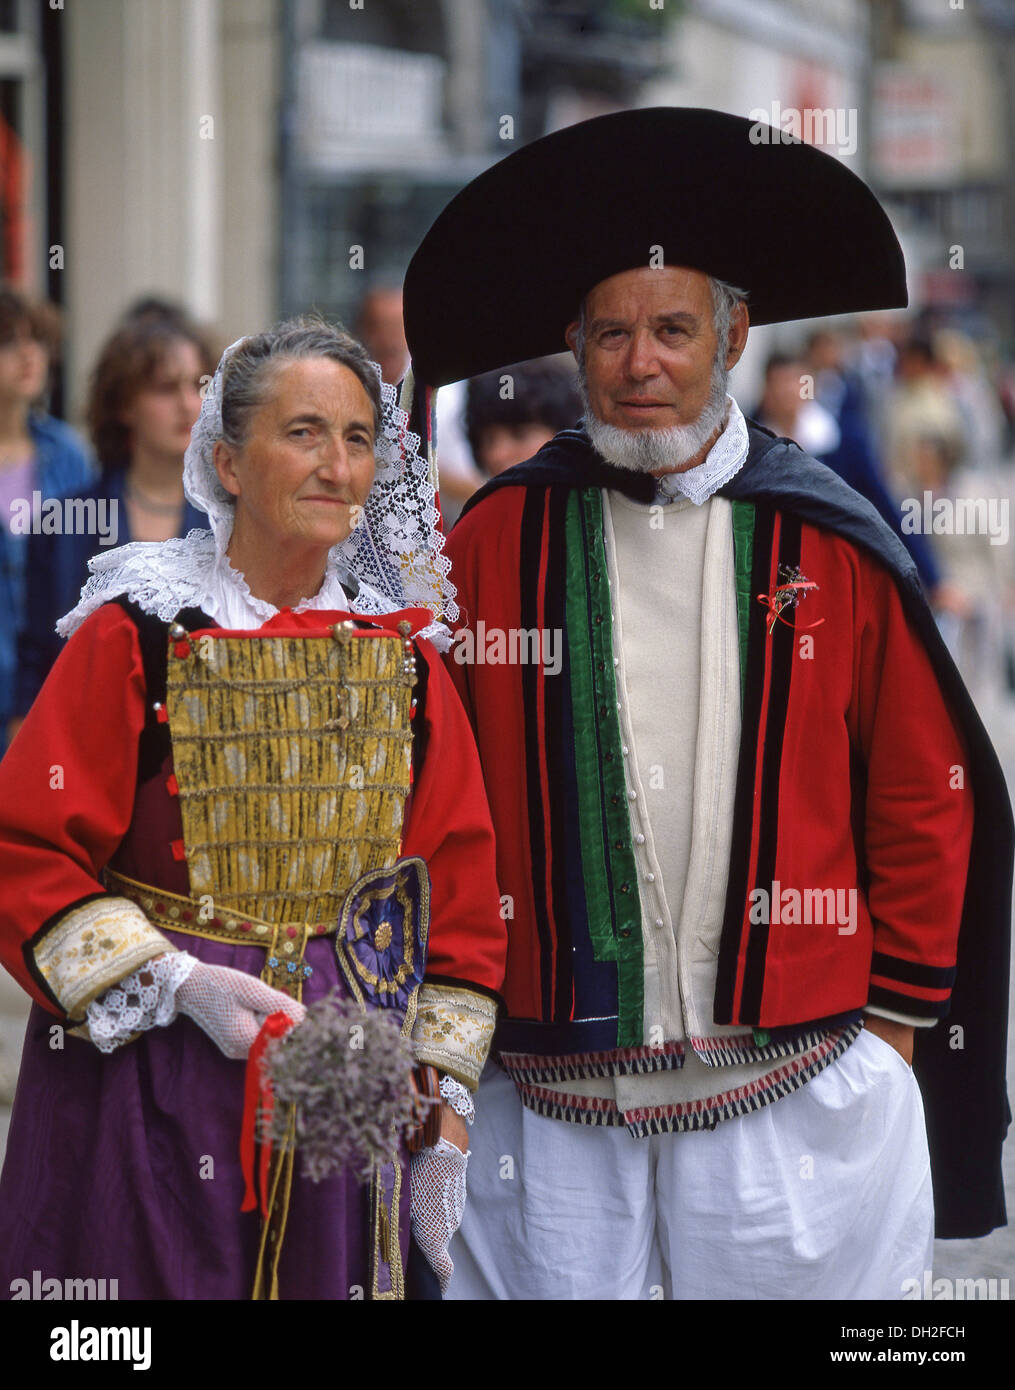 Couple in traditional dress at The Saint Loup festival, Guingamp, Côtes d'Armor Departement, Brittany, France Stock Photo